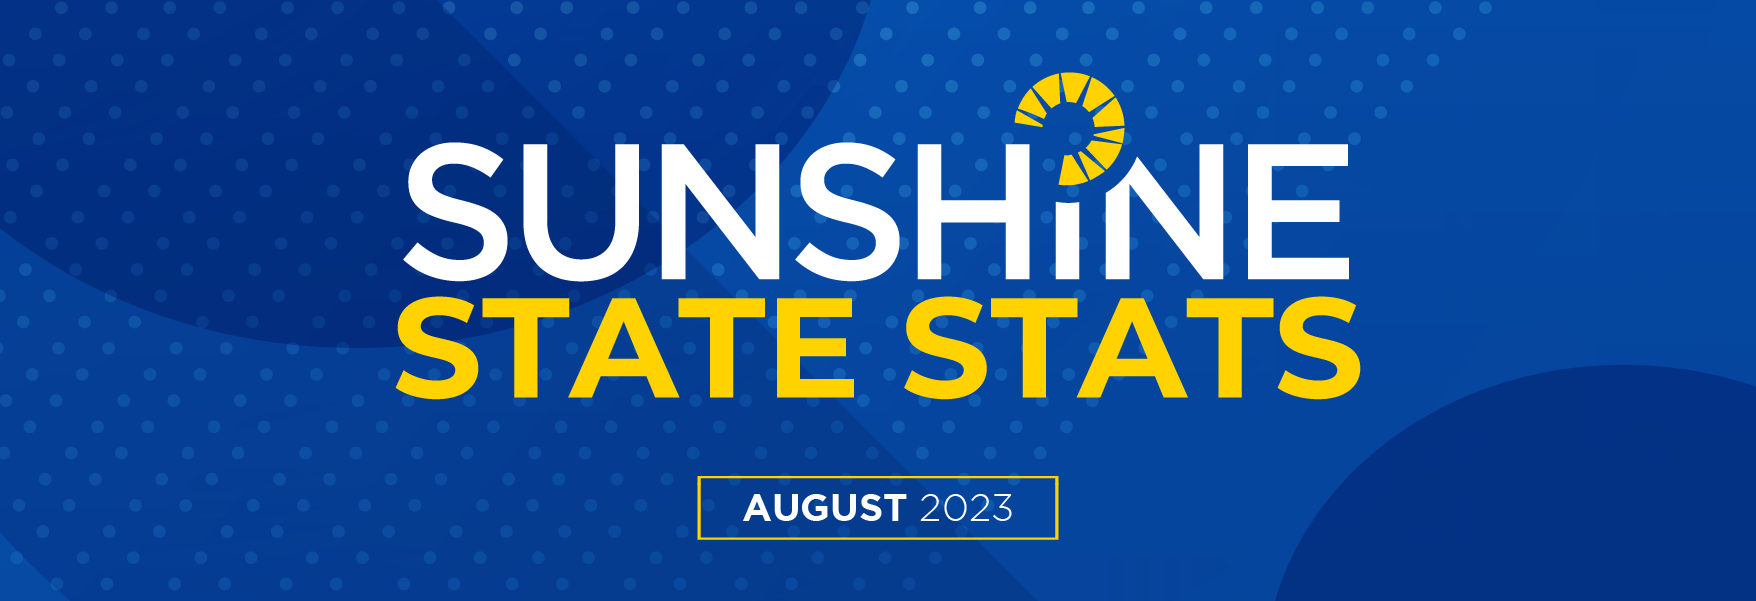 August 2023 Sunshine State Stats